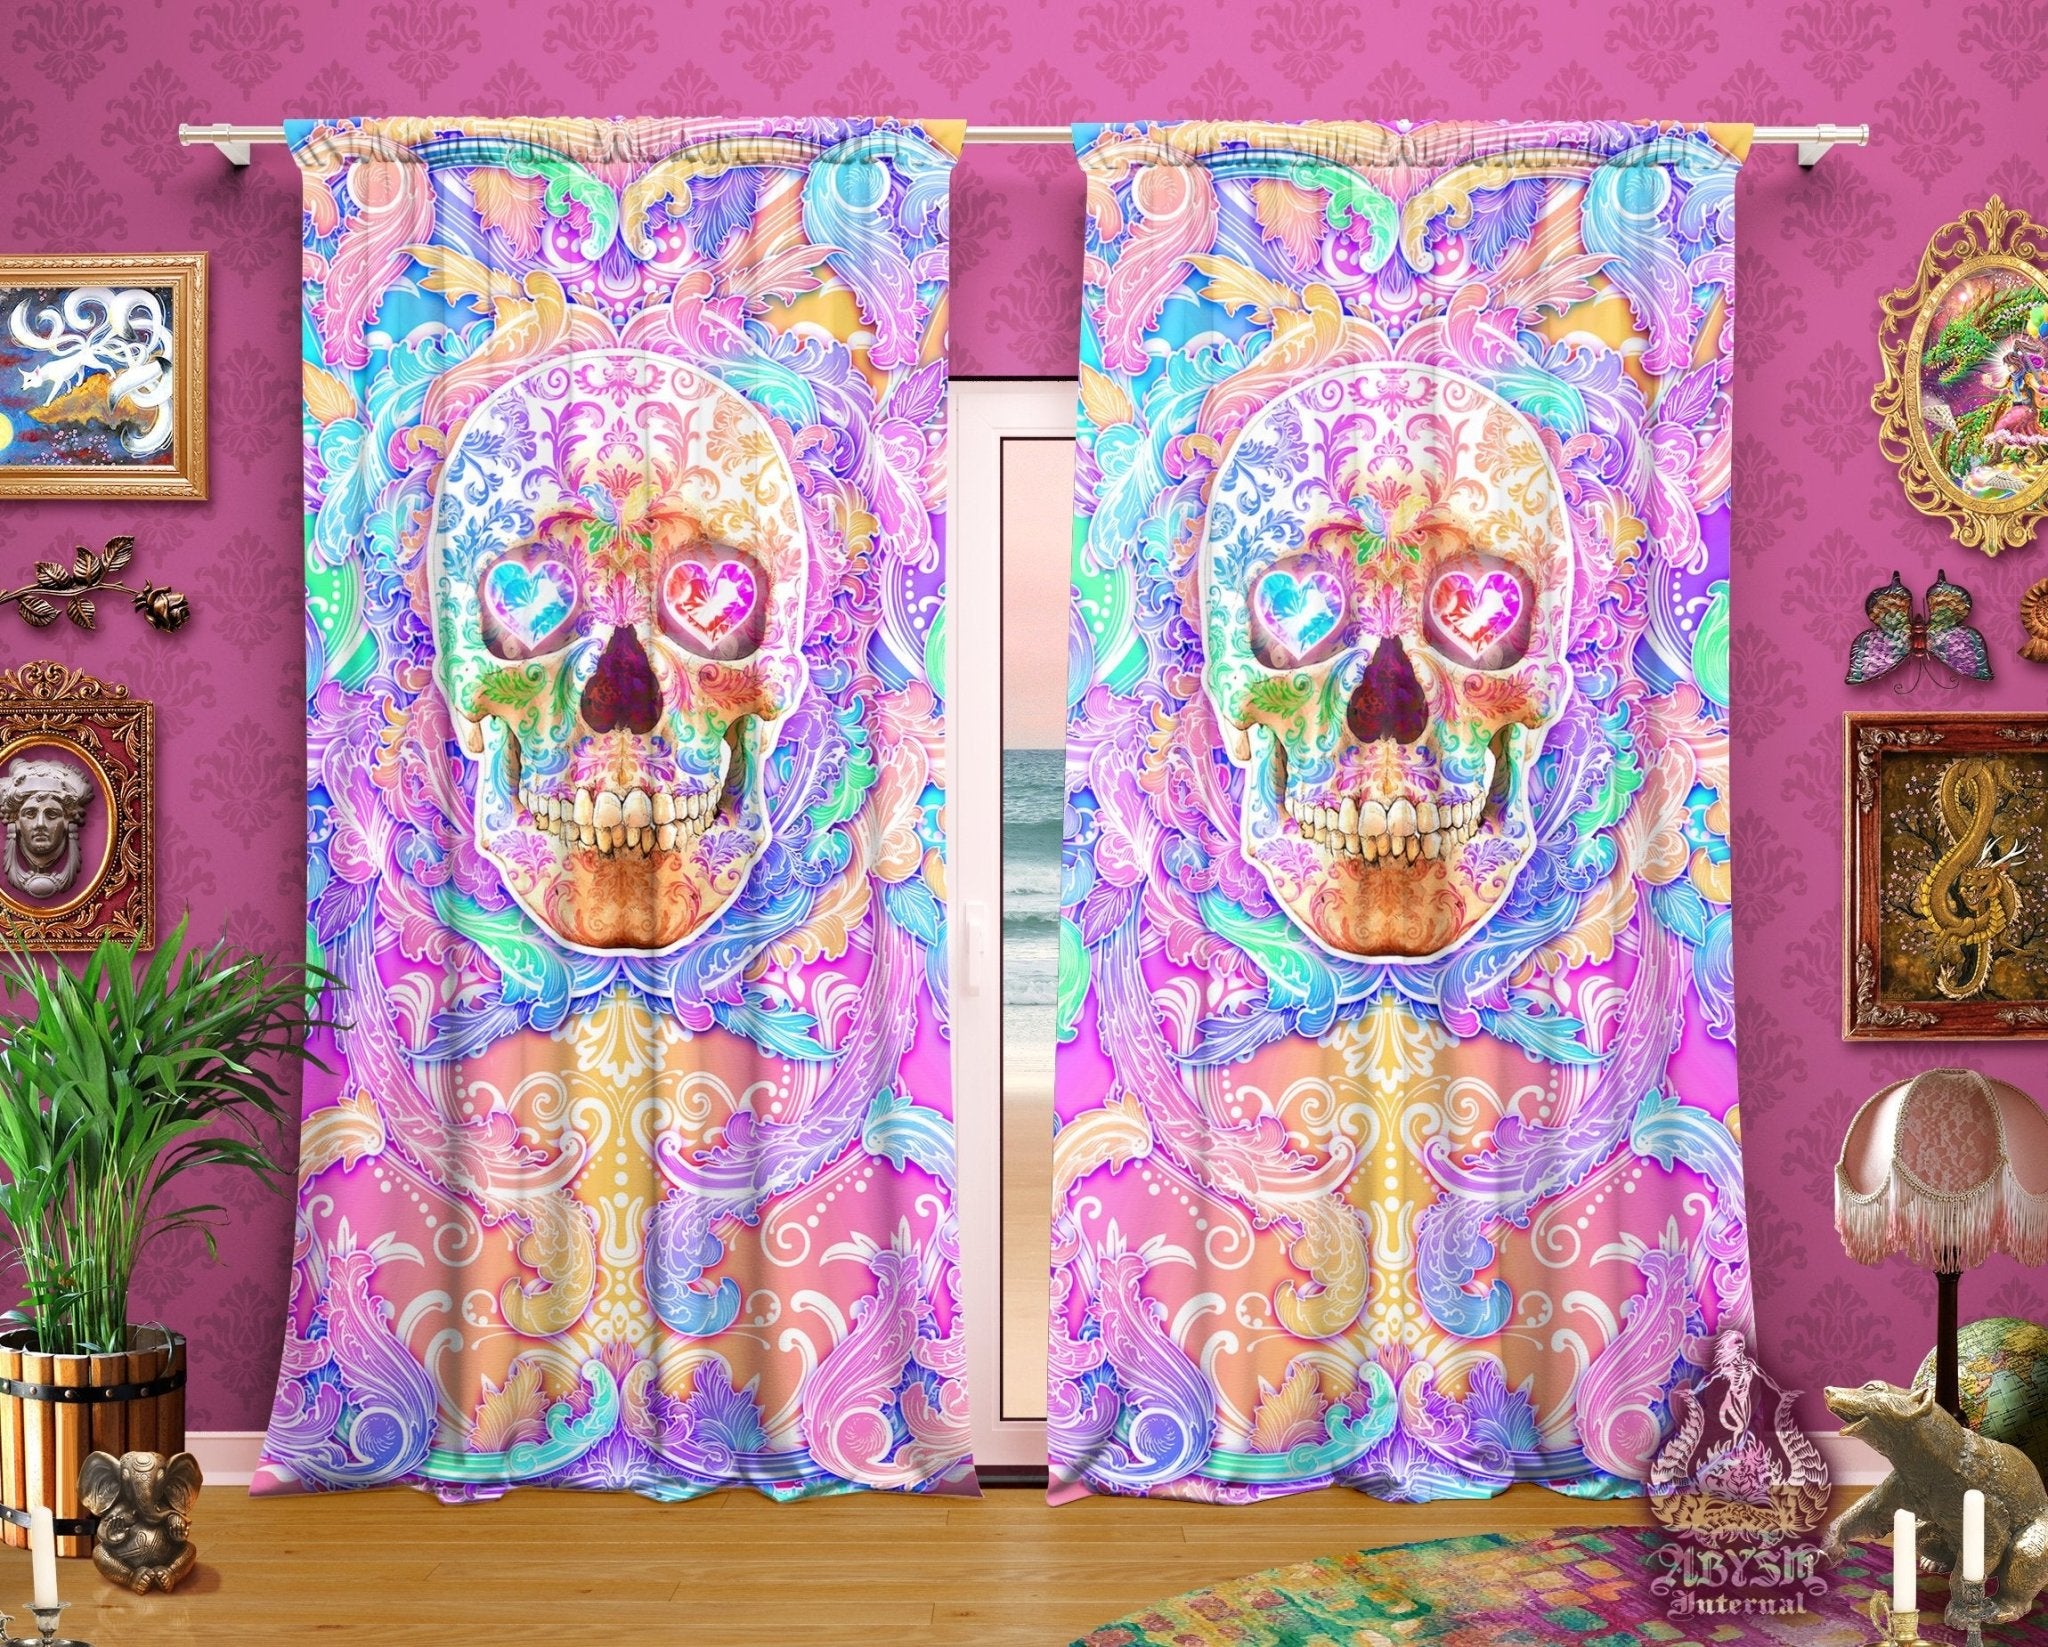 Pastel Skull Blackout Curtains, Long Window Panels, Psychedelic Art Print, Horror Decor, Funky and Eclectic Home Decor - Holographic and Aesthetic Room Decor - Abysm Internal